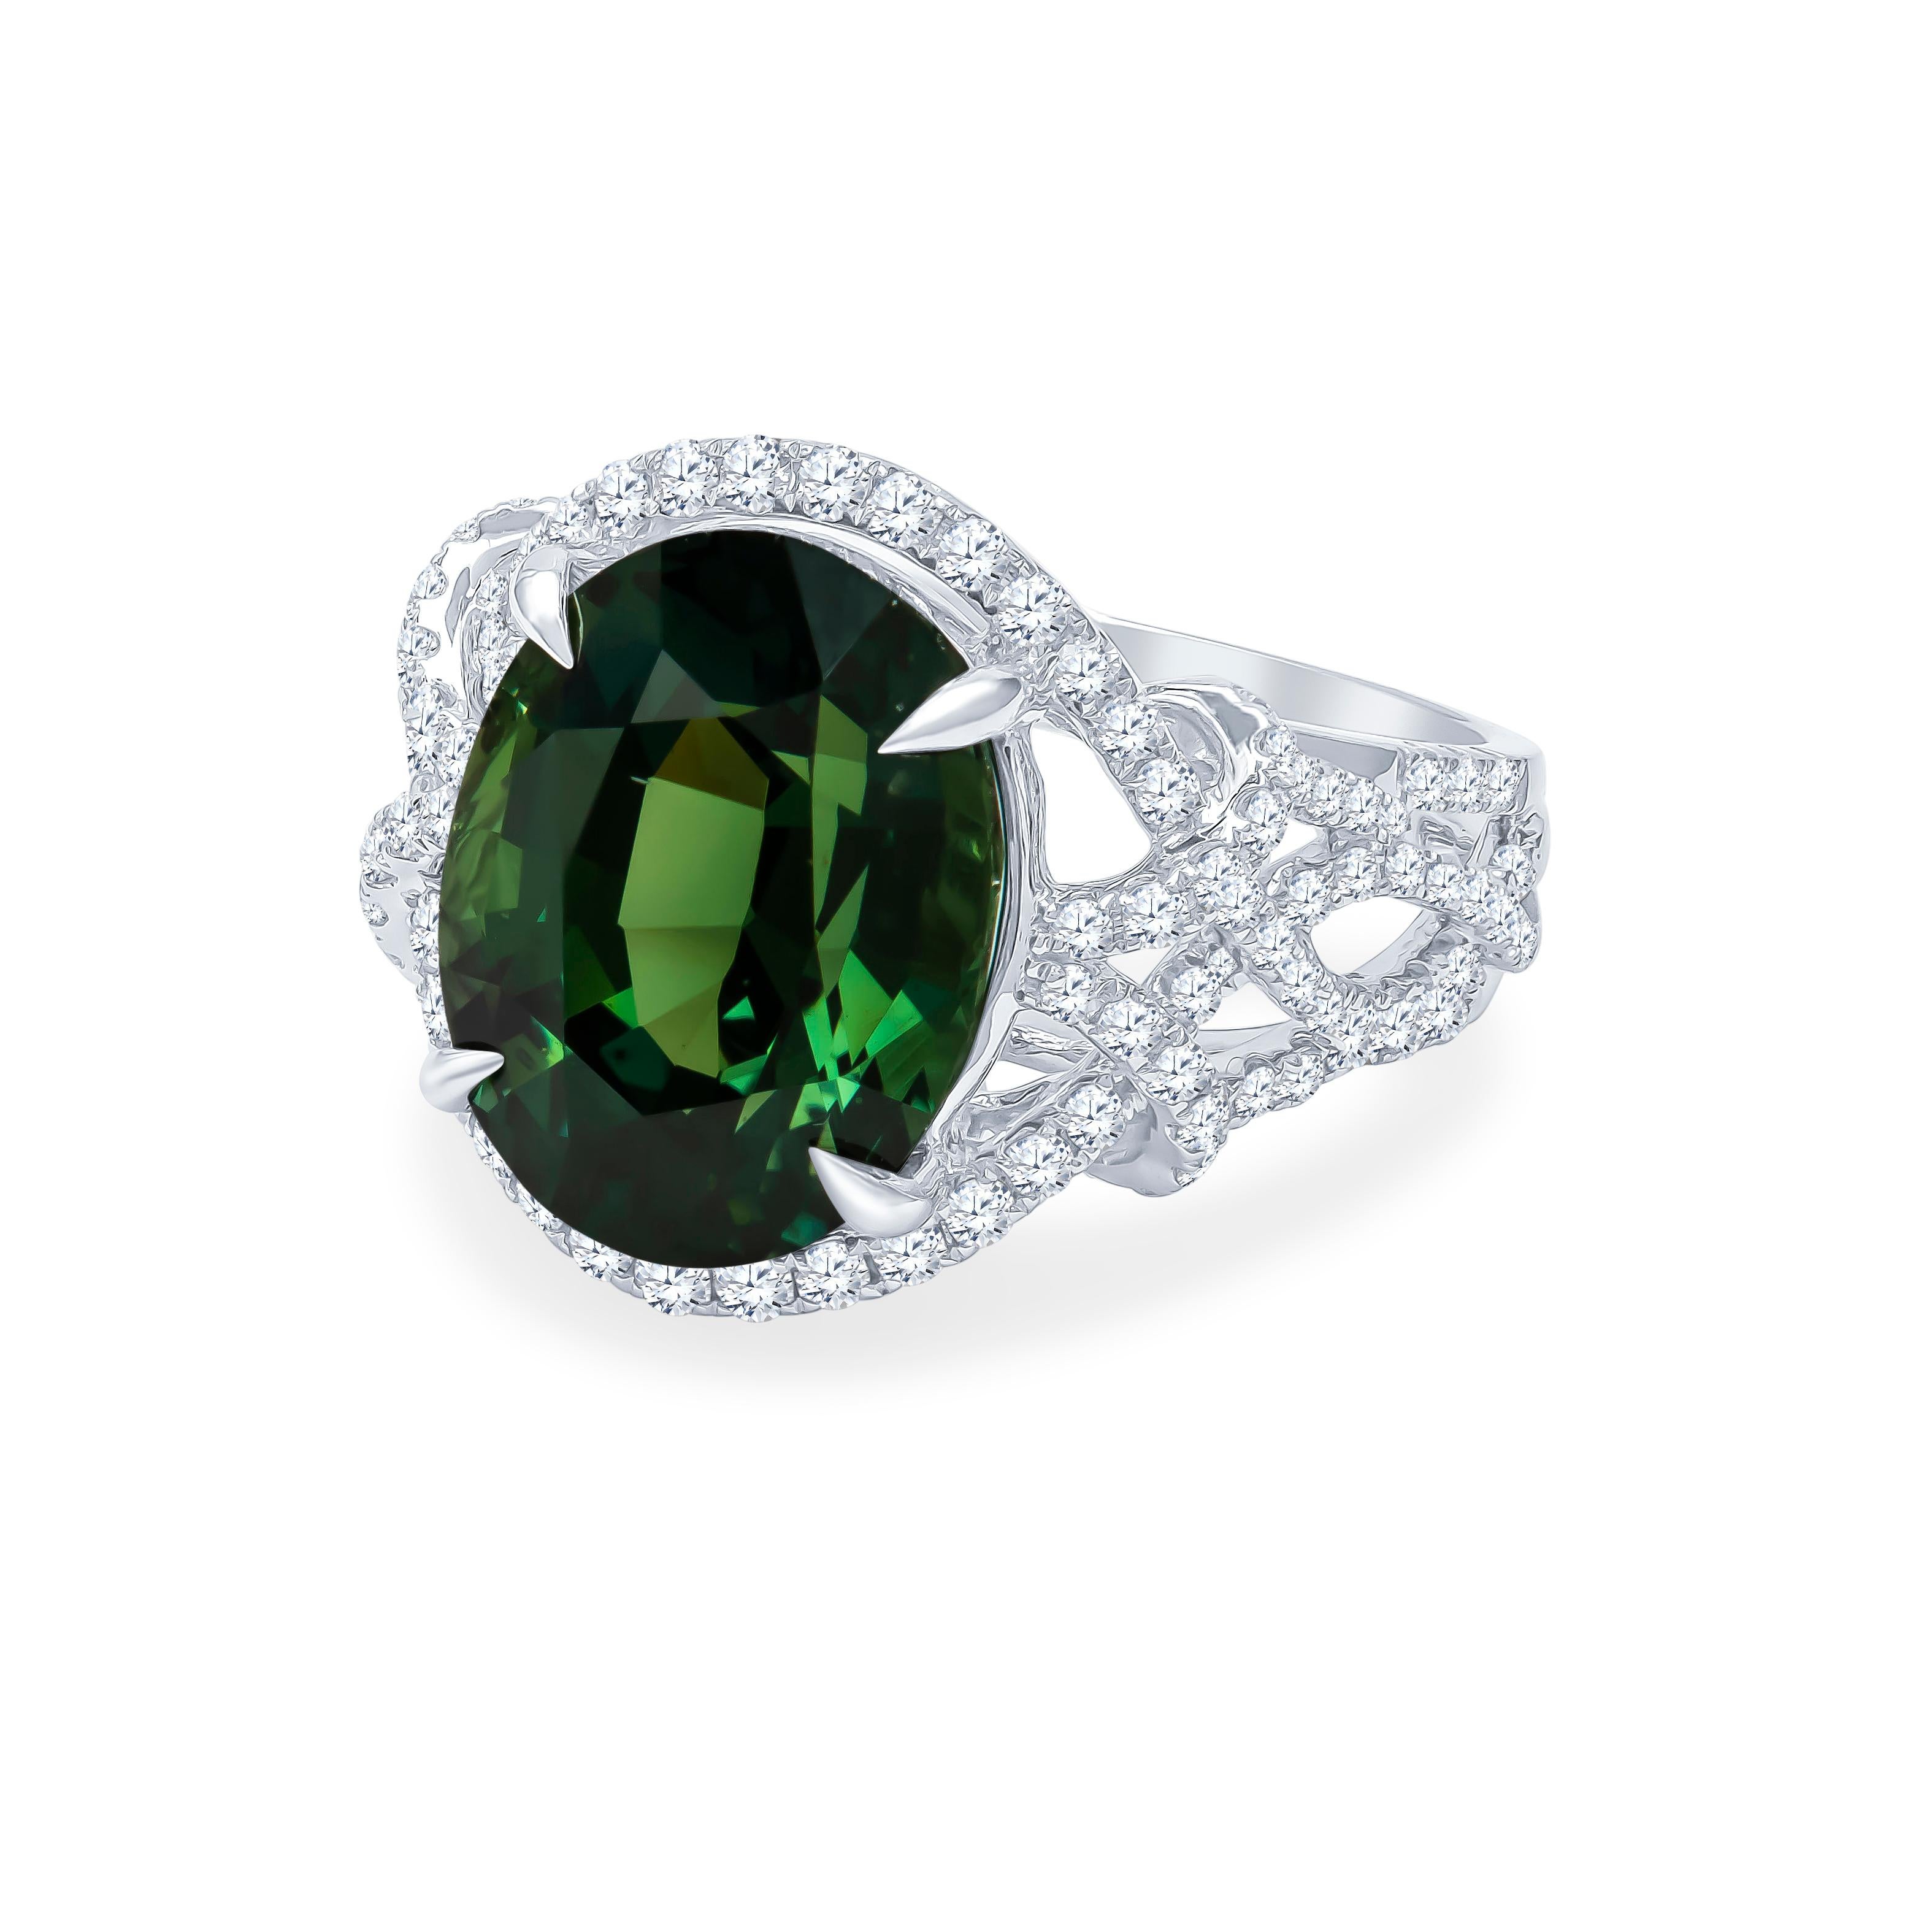 11.18 Carat natural oval cut green sapphire (GRS lab report) center stone with 0.80 carats total weight in fine round diamonds set in 18K white gold. The sapphire is a rich, beautiful forest green color with exceptional life which is difficult to